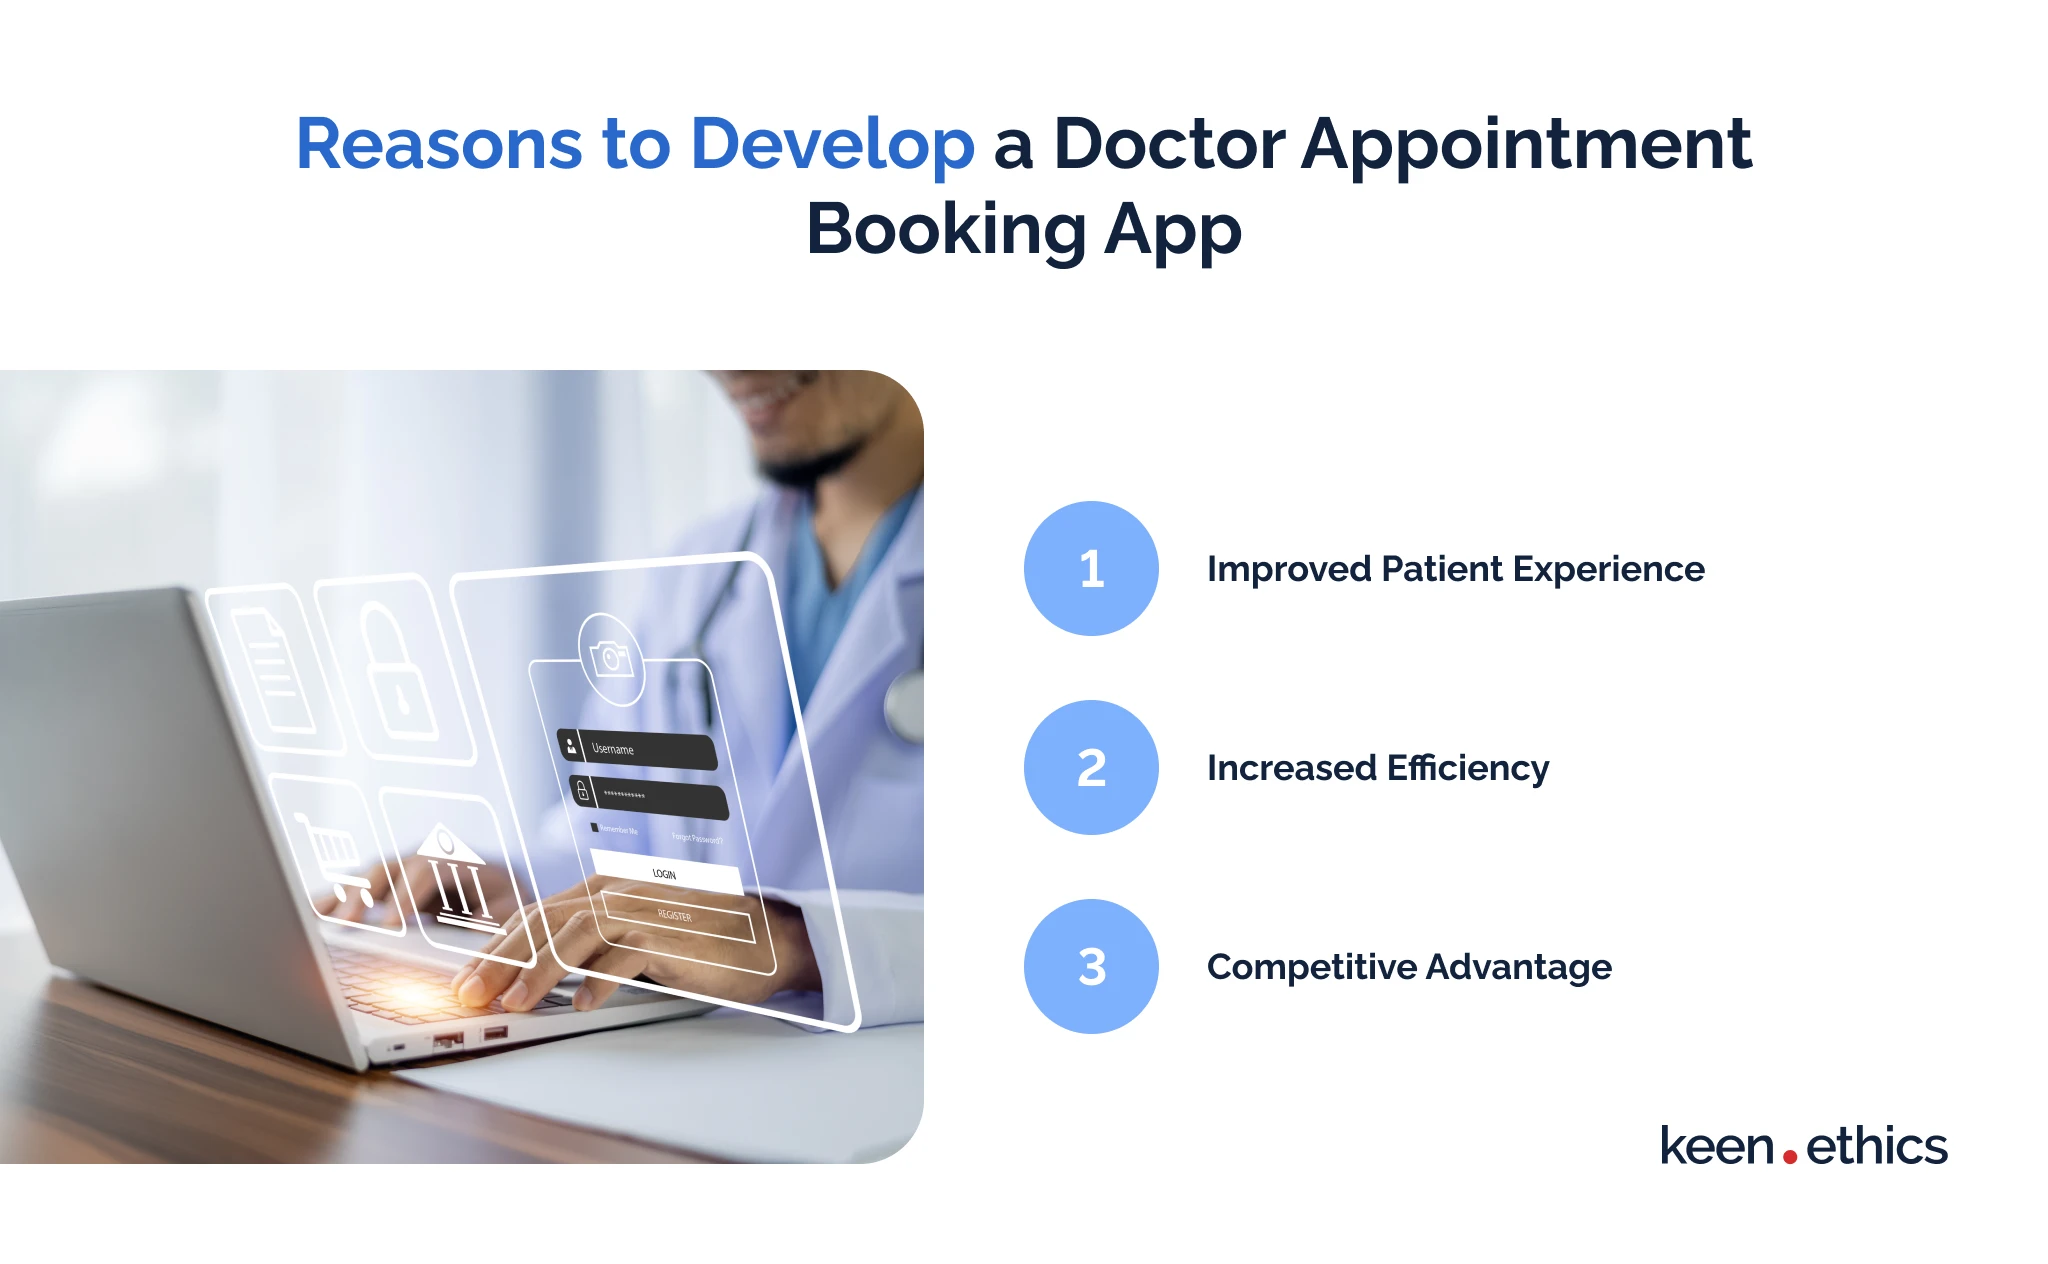 Reasons to develop a doctor appointment booking app